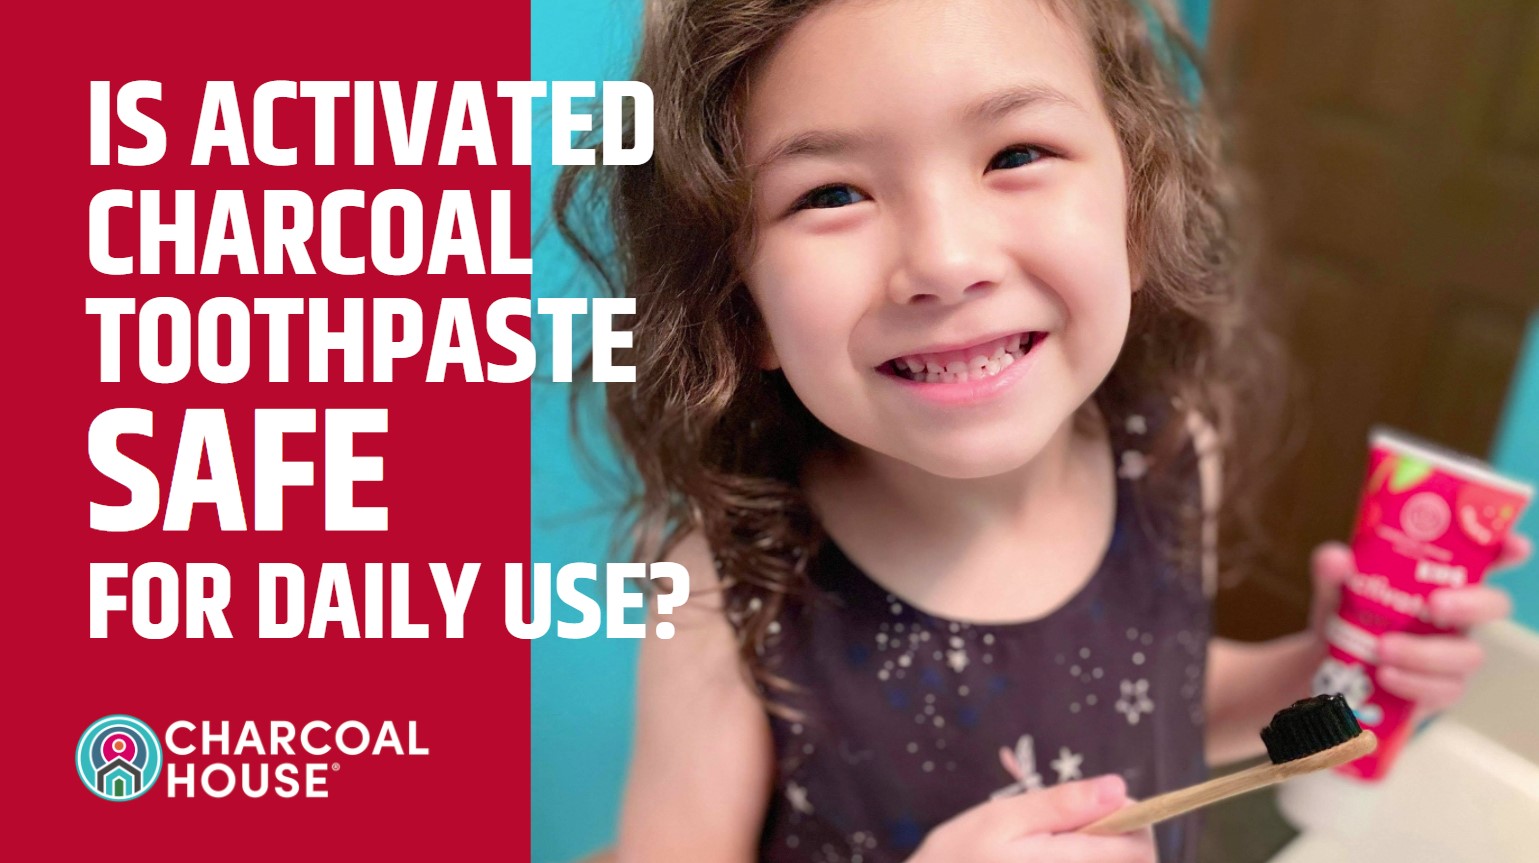 Is Activated Charcoal Toothpaste Safe for Daily Use